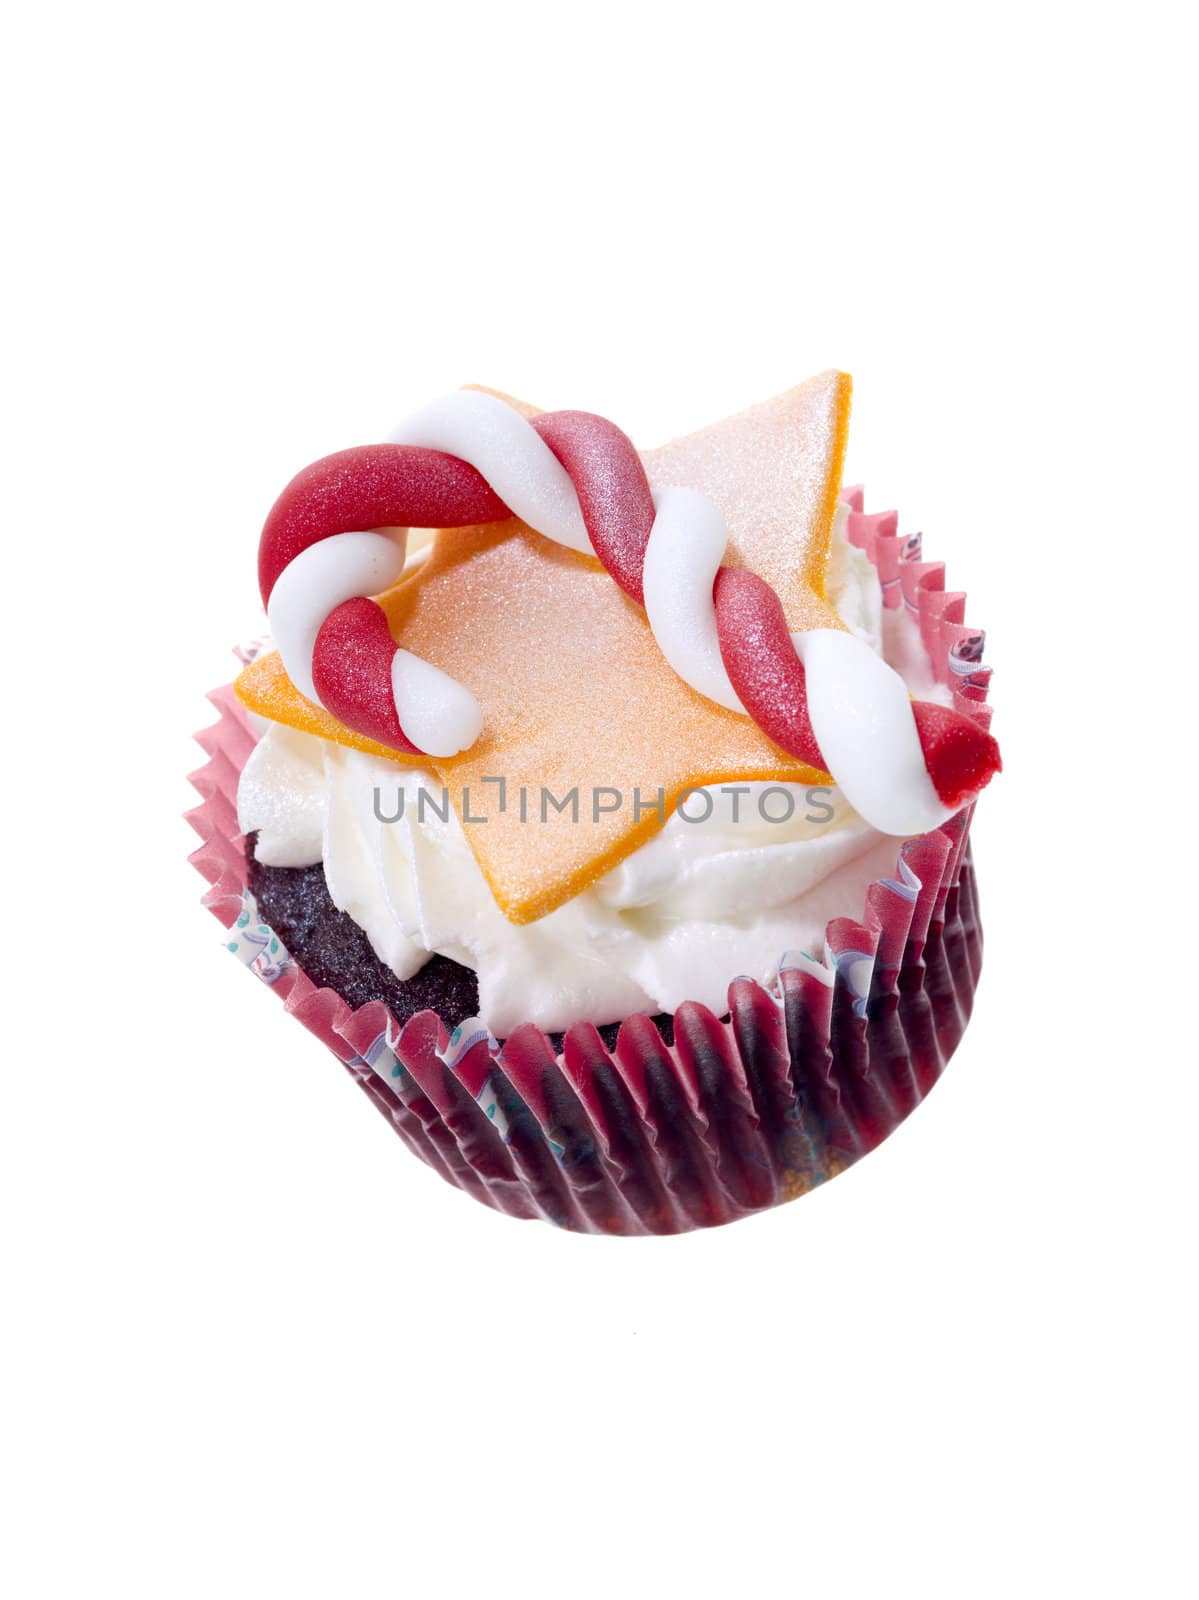 Cupcake with frosting candy cane and star toppings